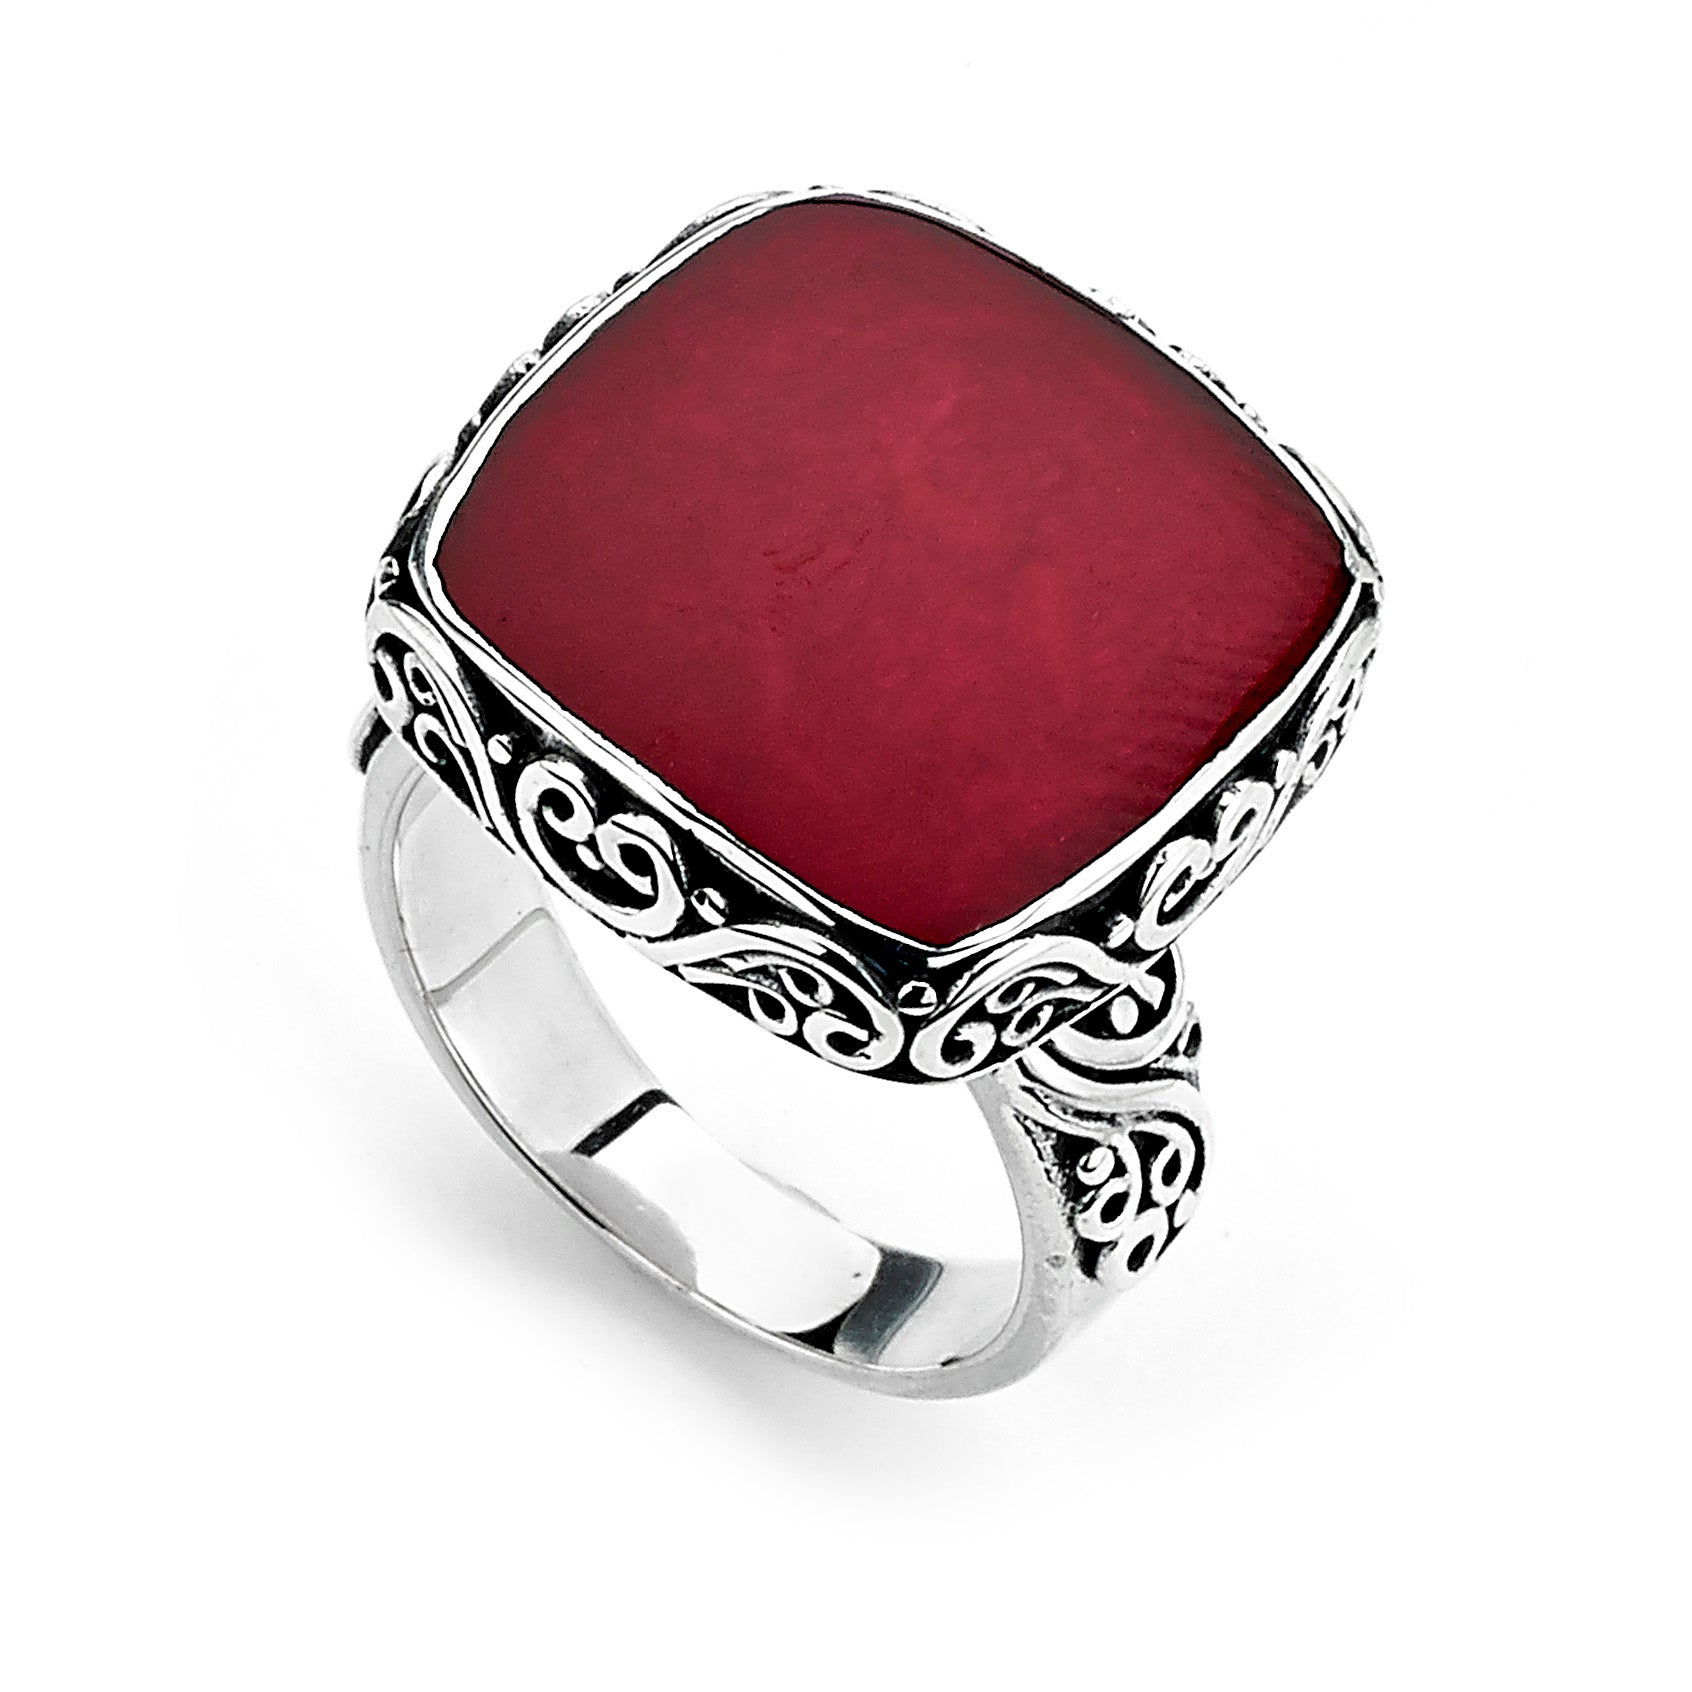 Samuel B. Sterling Silver Square Balinese Design Coral Ring